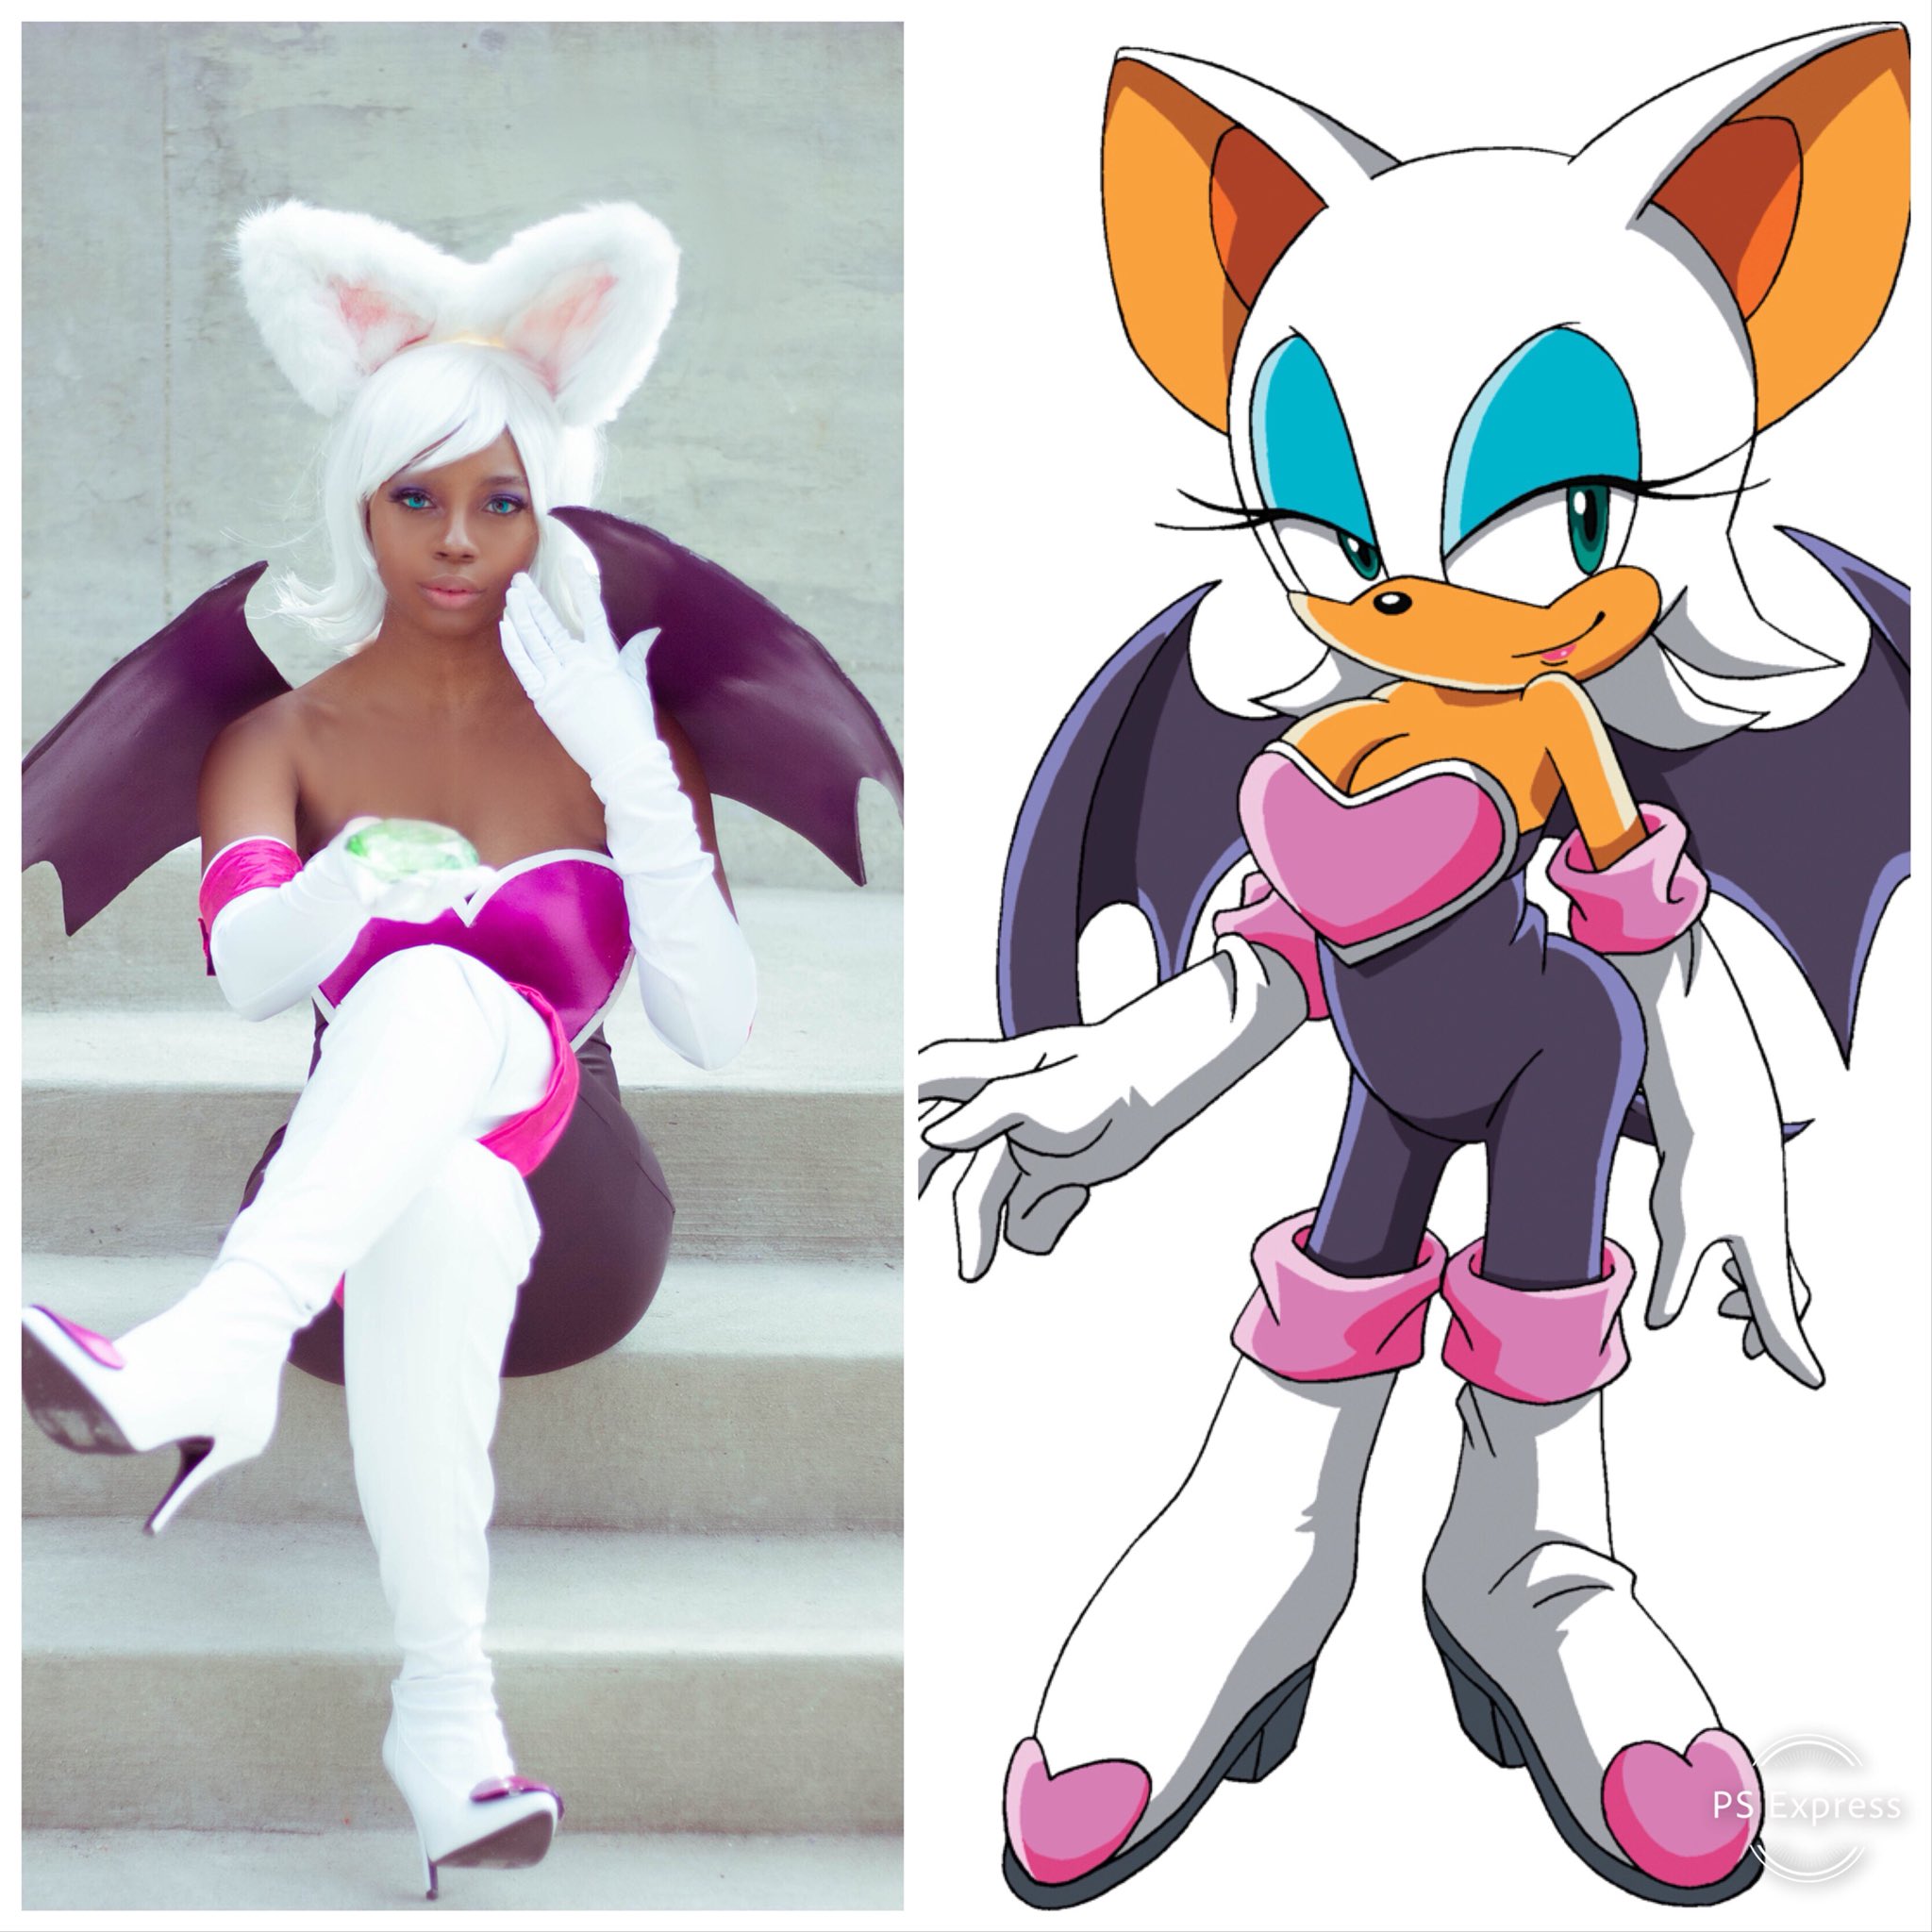 My Rouge The Bat cosplay collaboration w. ✨. 986. 